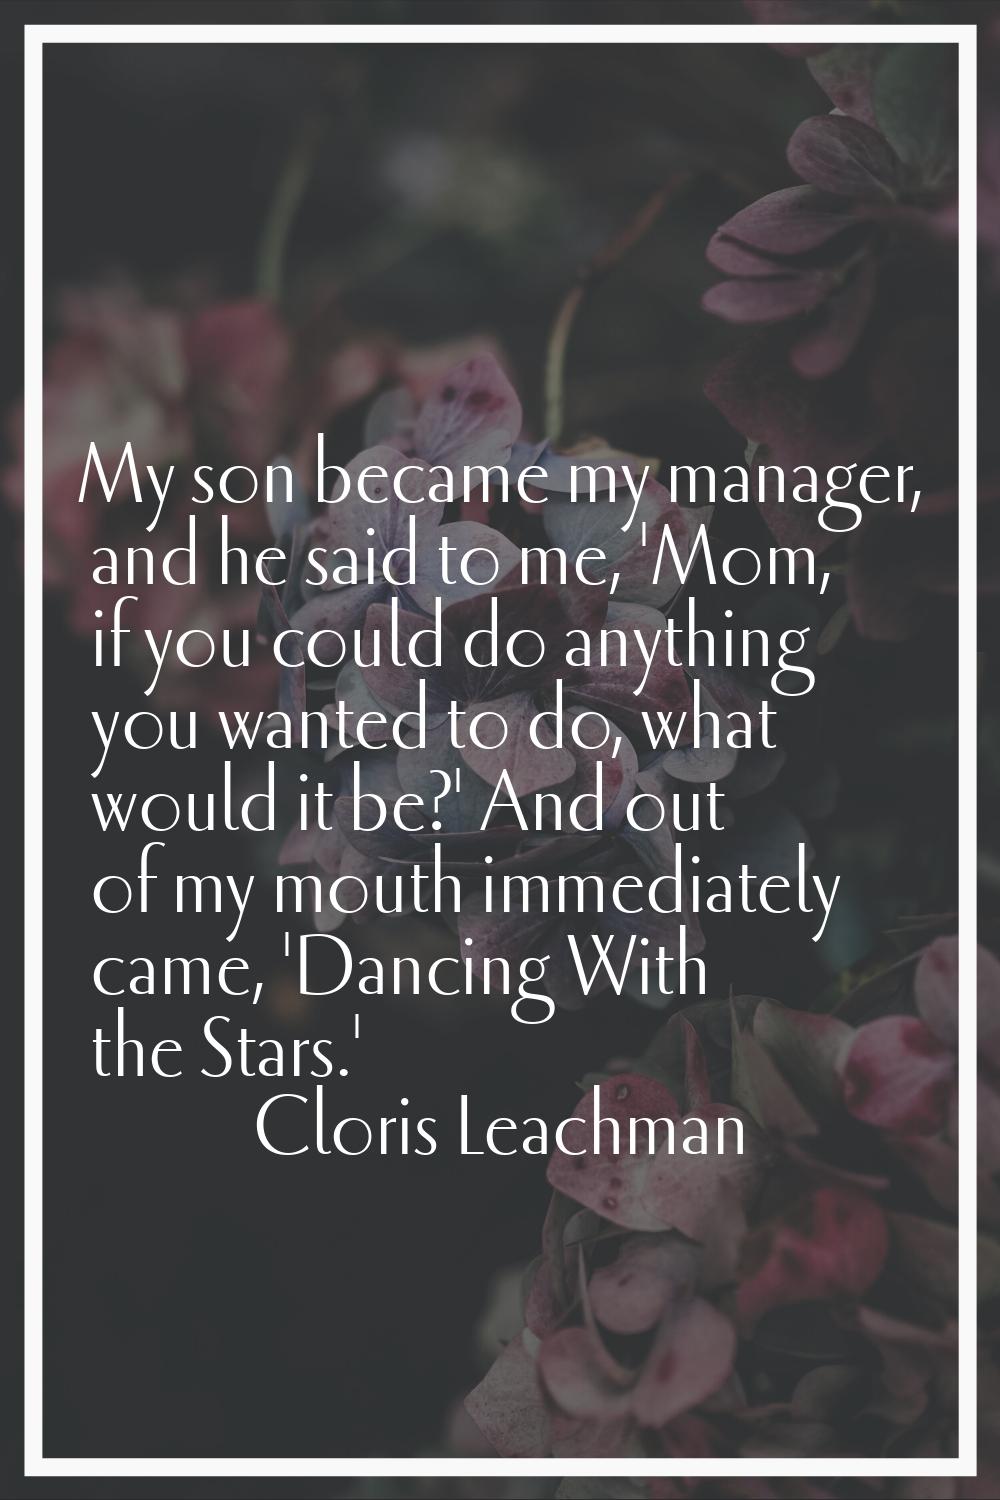 My son became my manager, and he said to me, 'Mom, if you could do anything you wanted to do, what 